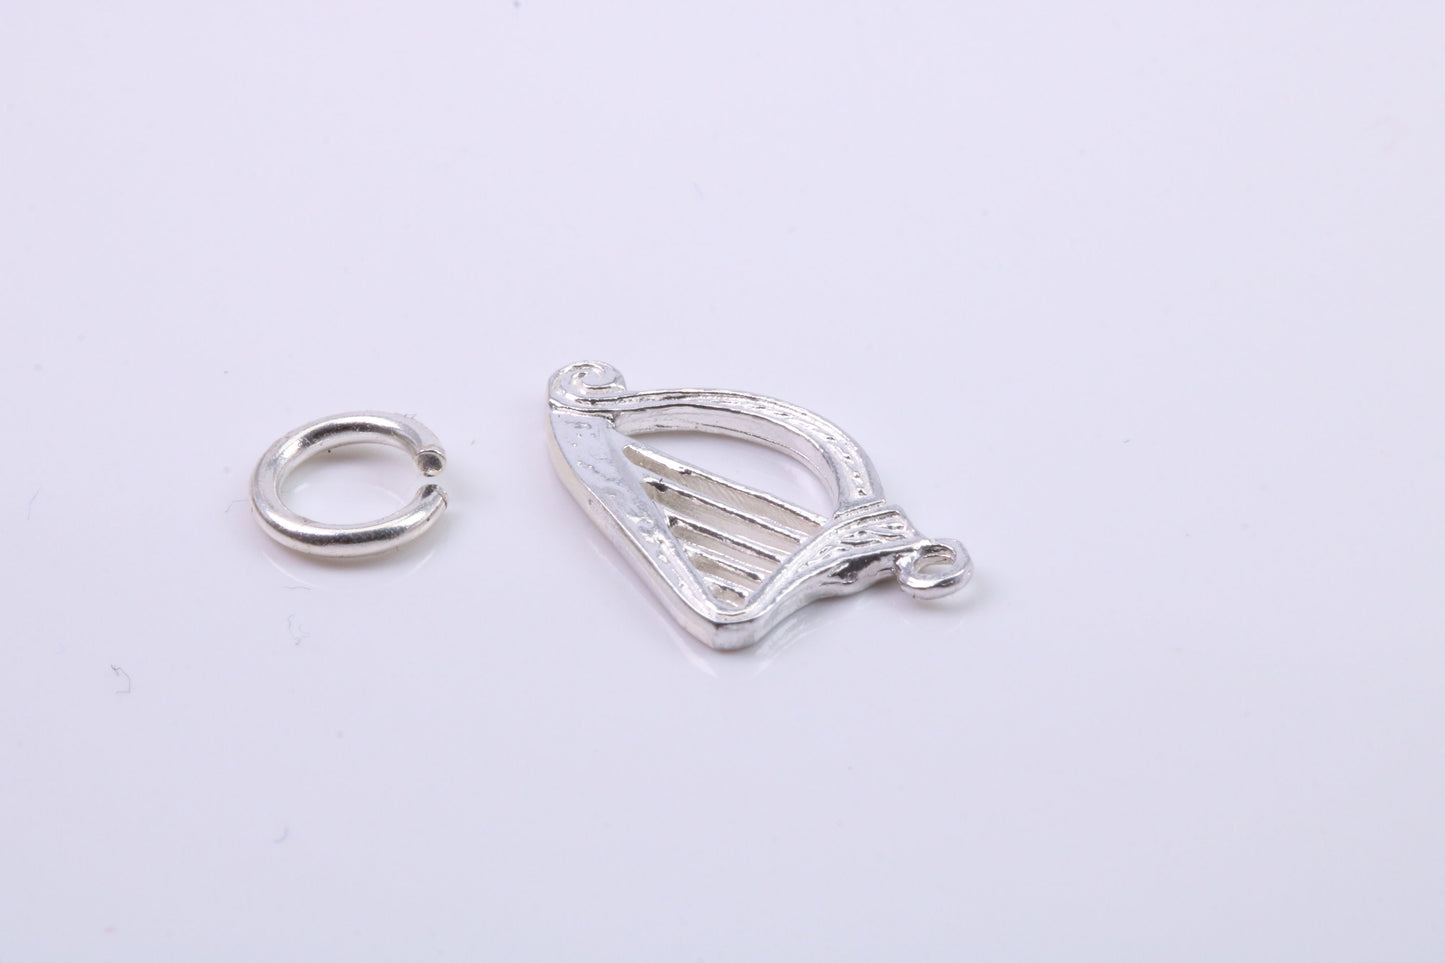 Harp Charm, Traditional Charm, Made from Solid 925 Grade Sterling Silver, Complete with Attachment Link